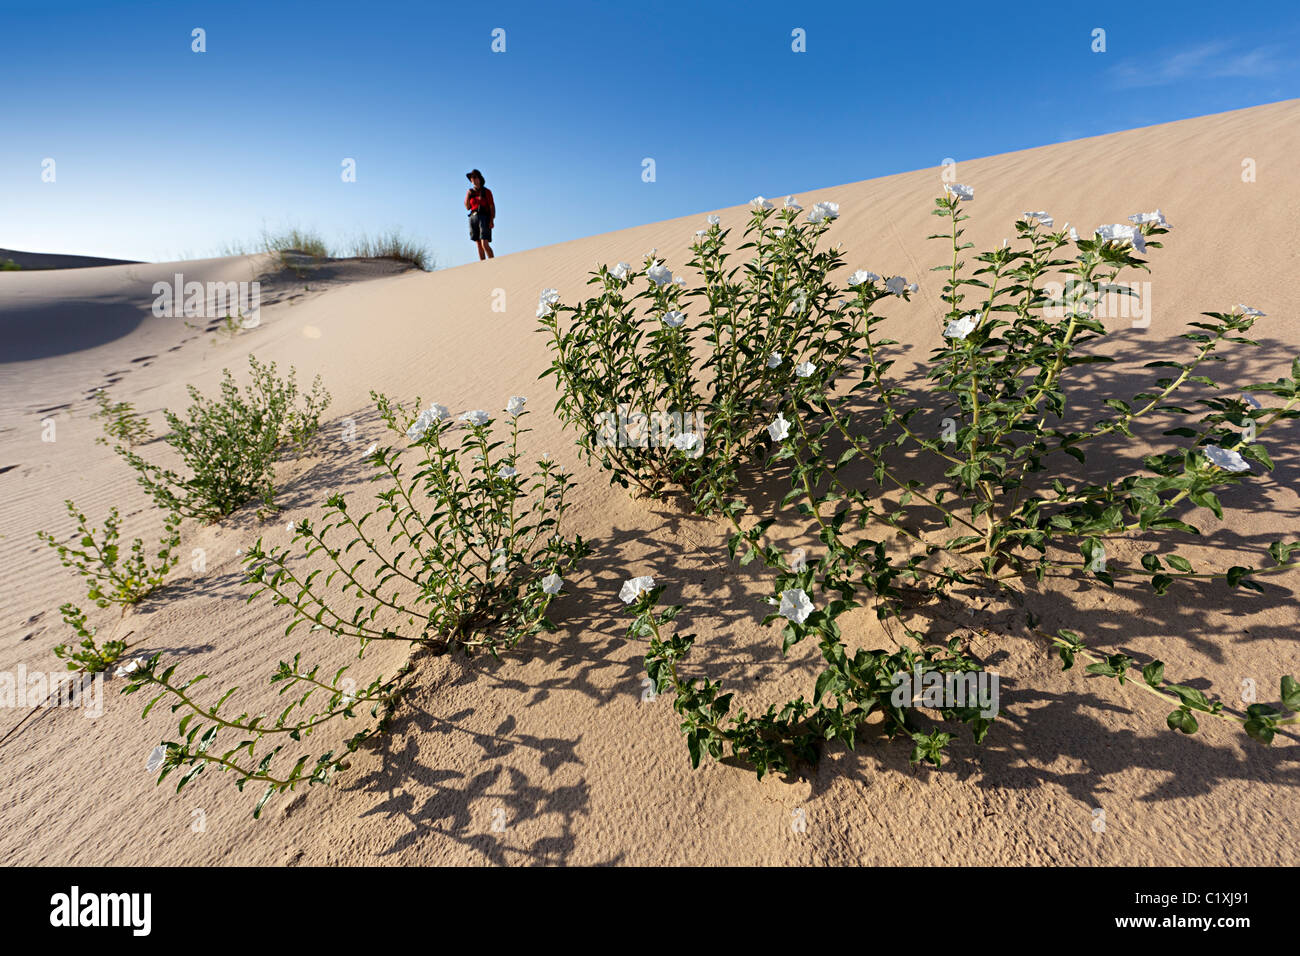 Sweet-scented Heliotrope Heliotropium convolvulaceum with person standing on dune Monahans Sand Hills State Park Texas USA Stock Photo